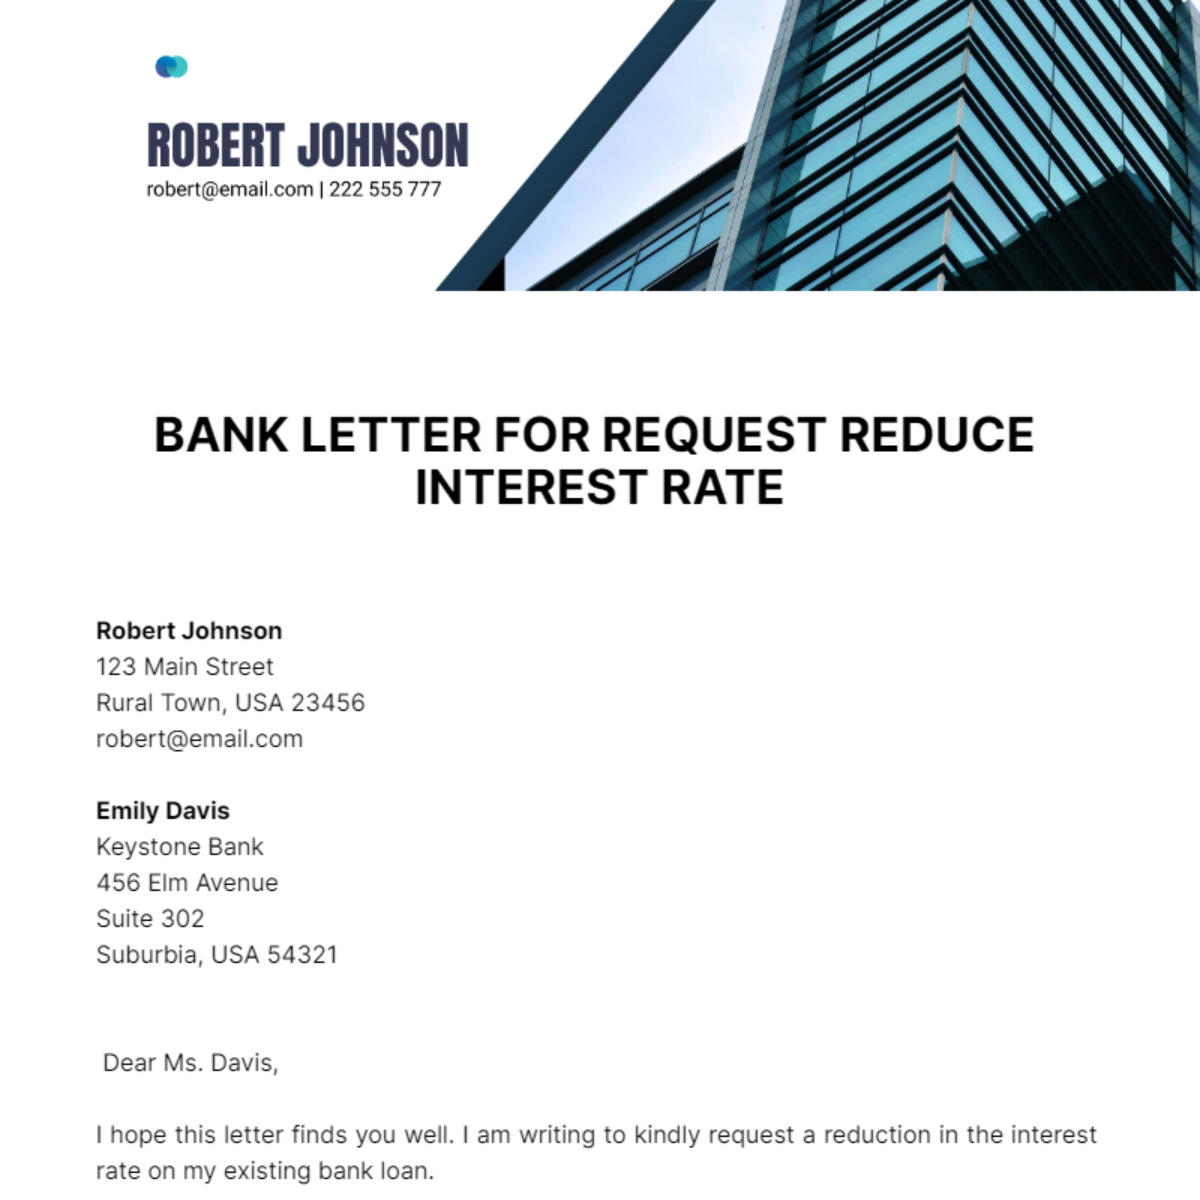 Bank Letter For Request Reduce Interest Rate  Template